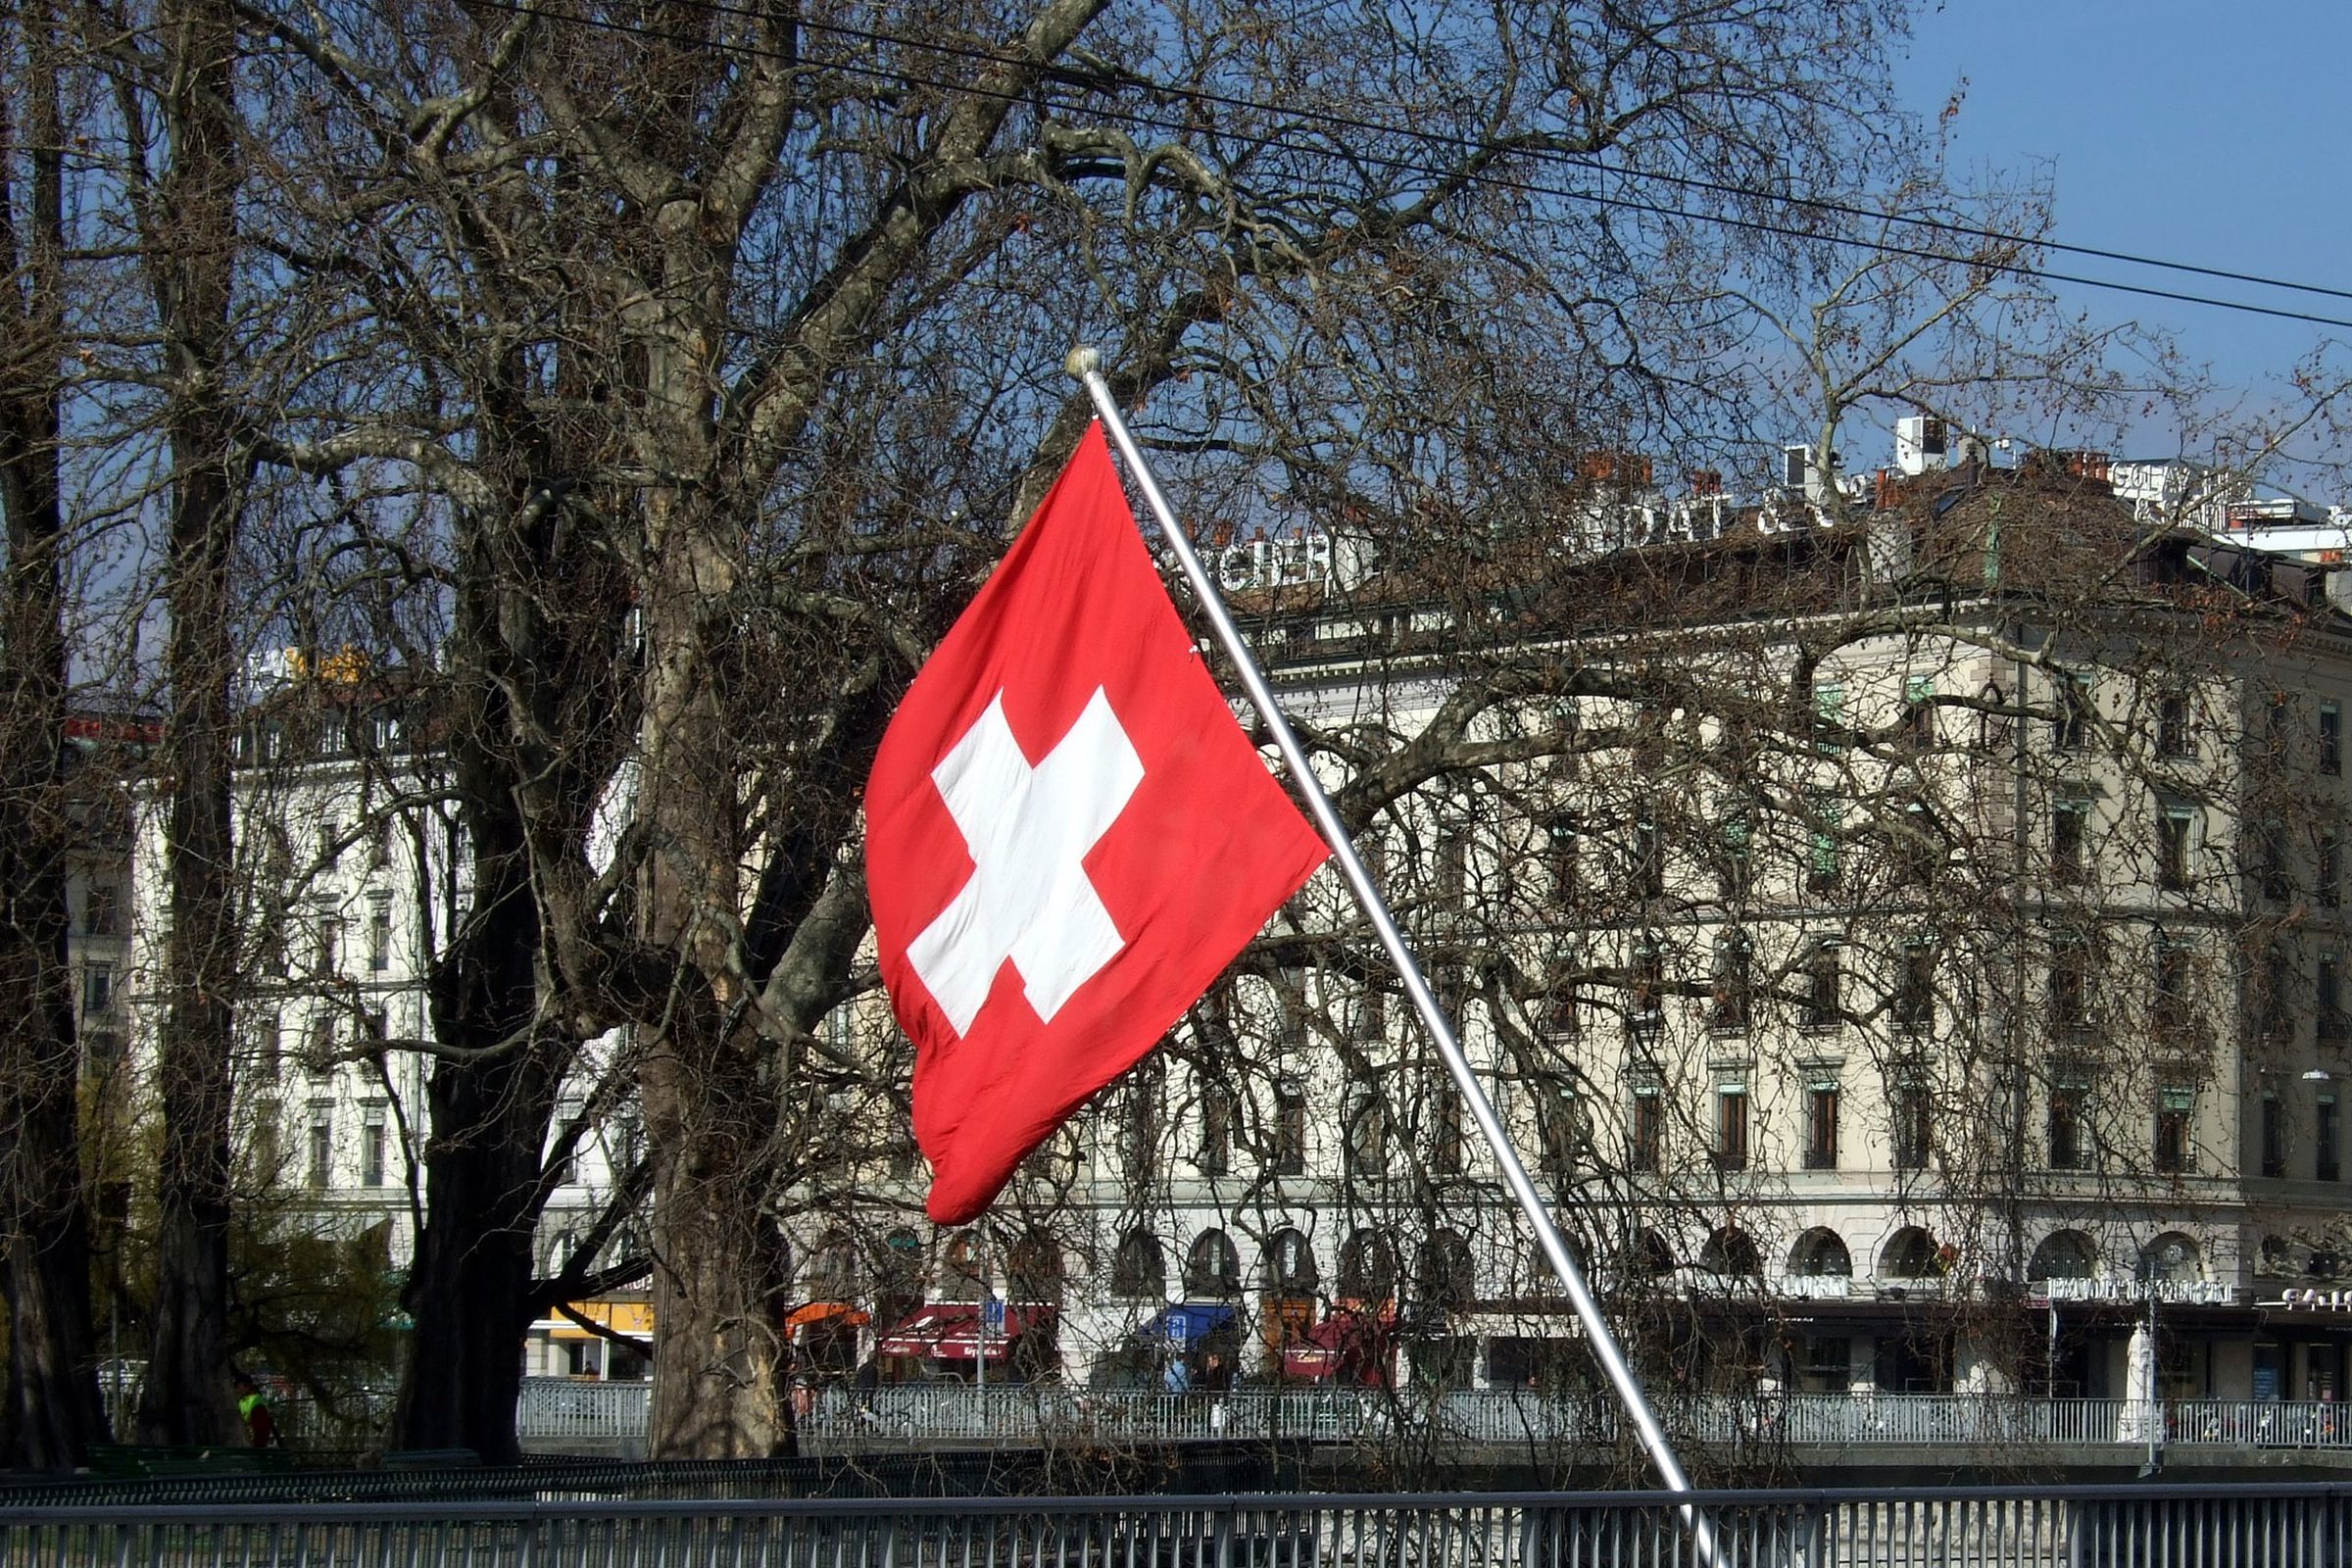 A picture of the Swiss flag